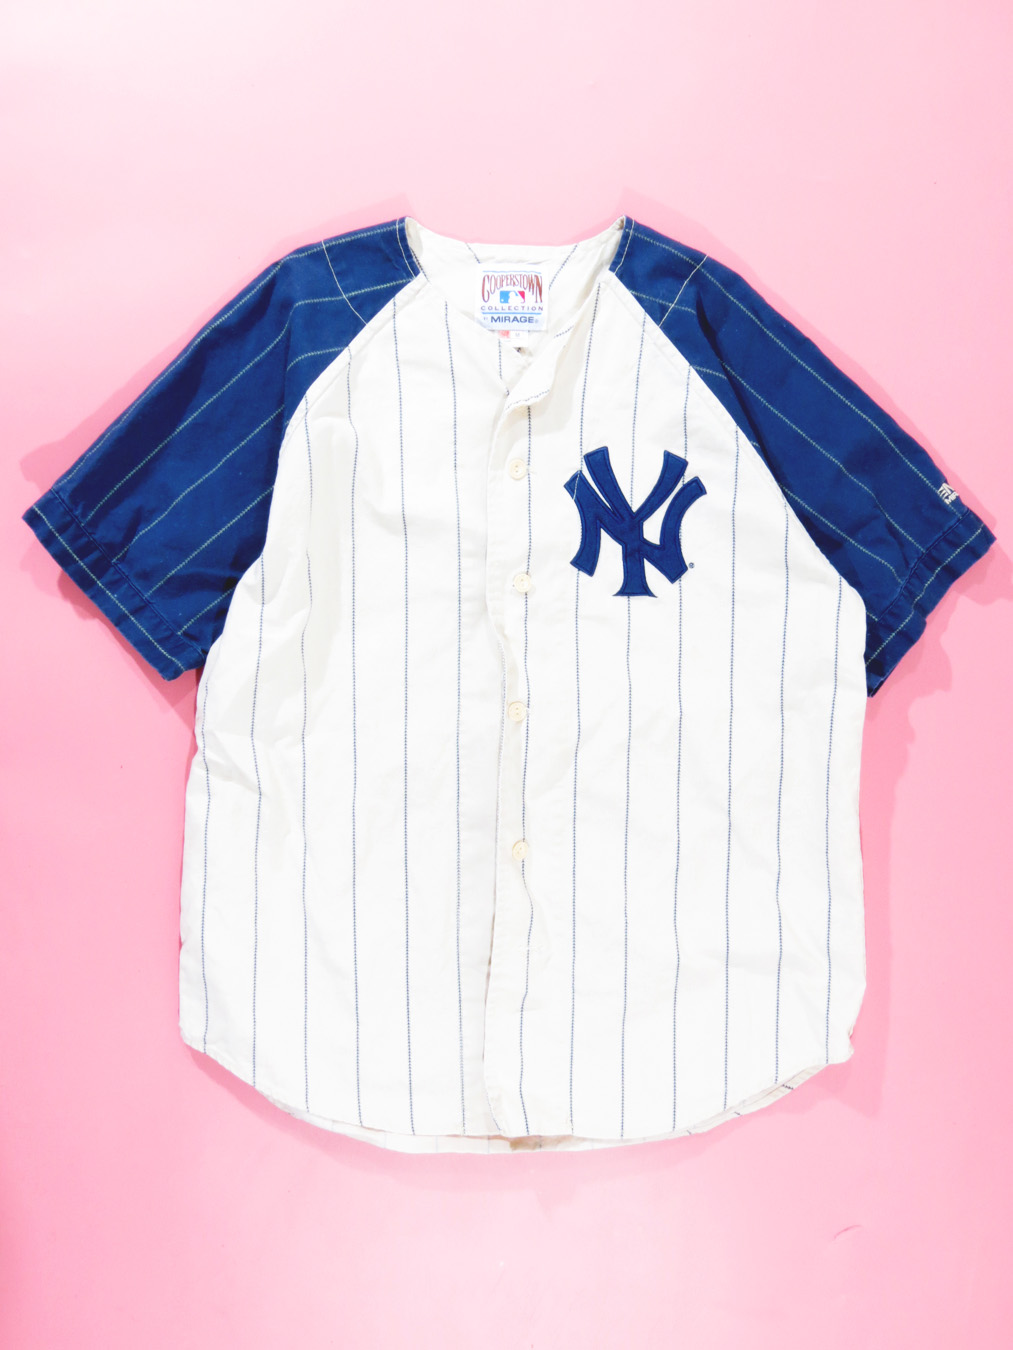 NY Yankees Throwback Mirage Pinstriped Mickey Mantle Jersey - 5 Star Vintage